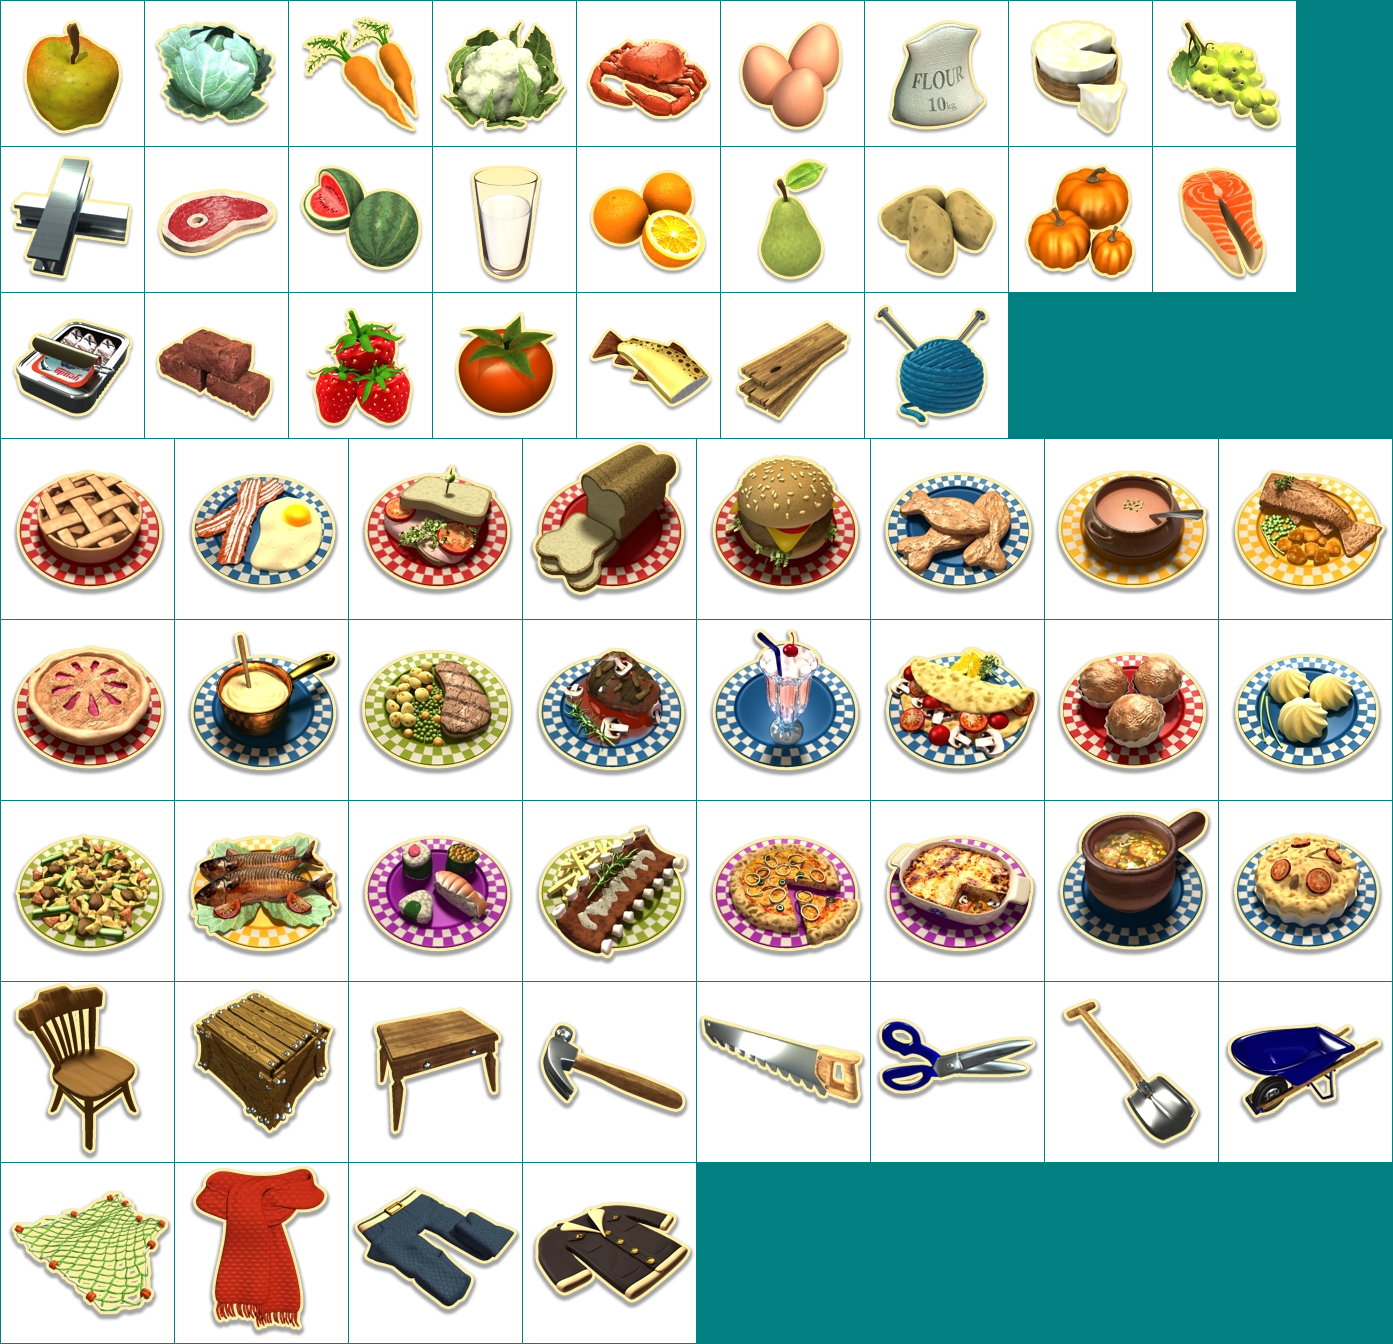 Products & Plates (Minigames)